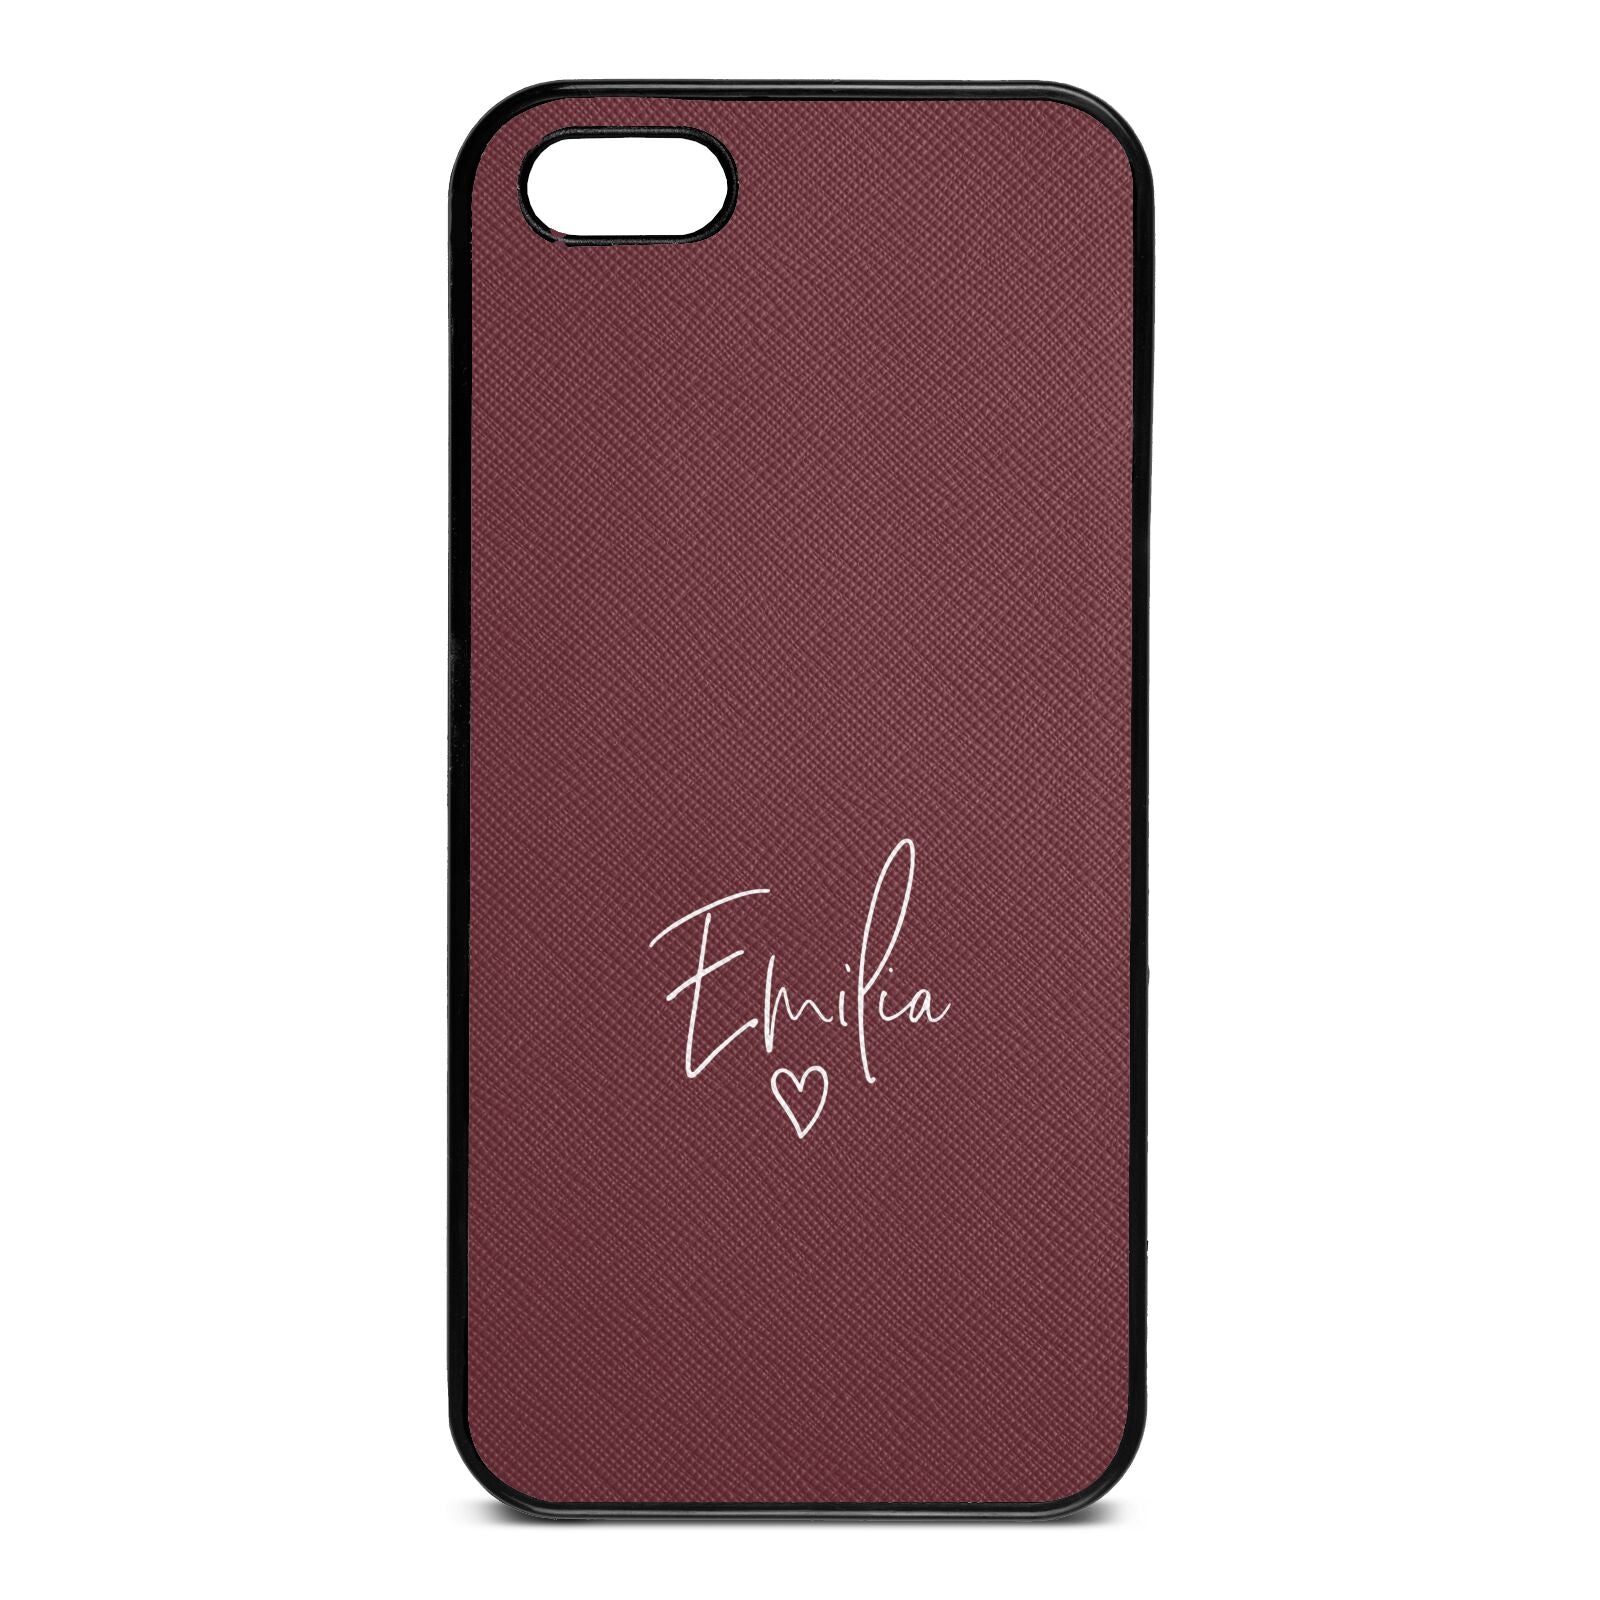 White Handwritten Name Transparent Rose Brown Saffiano Leather iPhone 5 Case